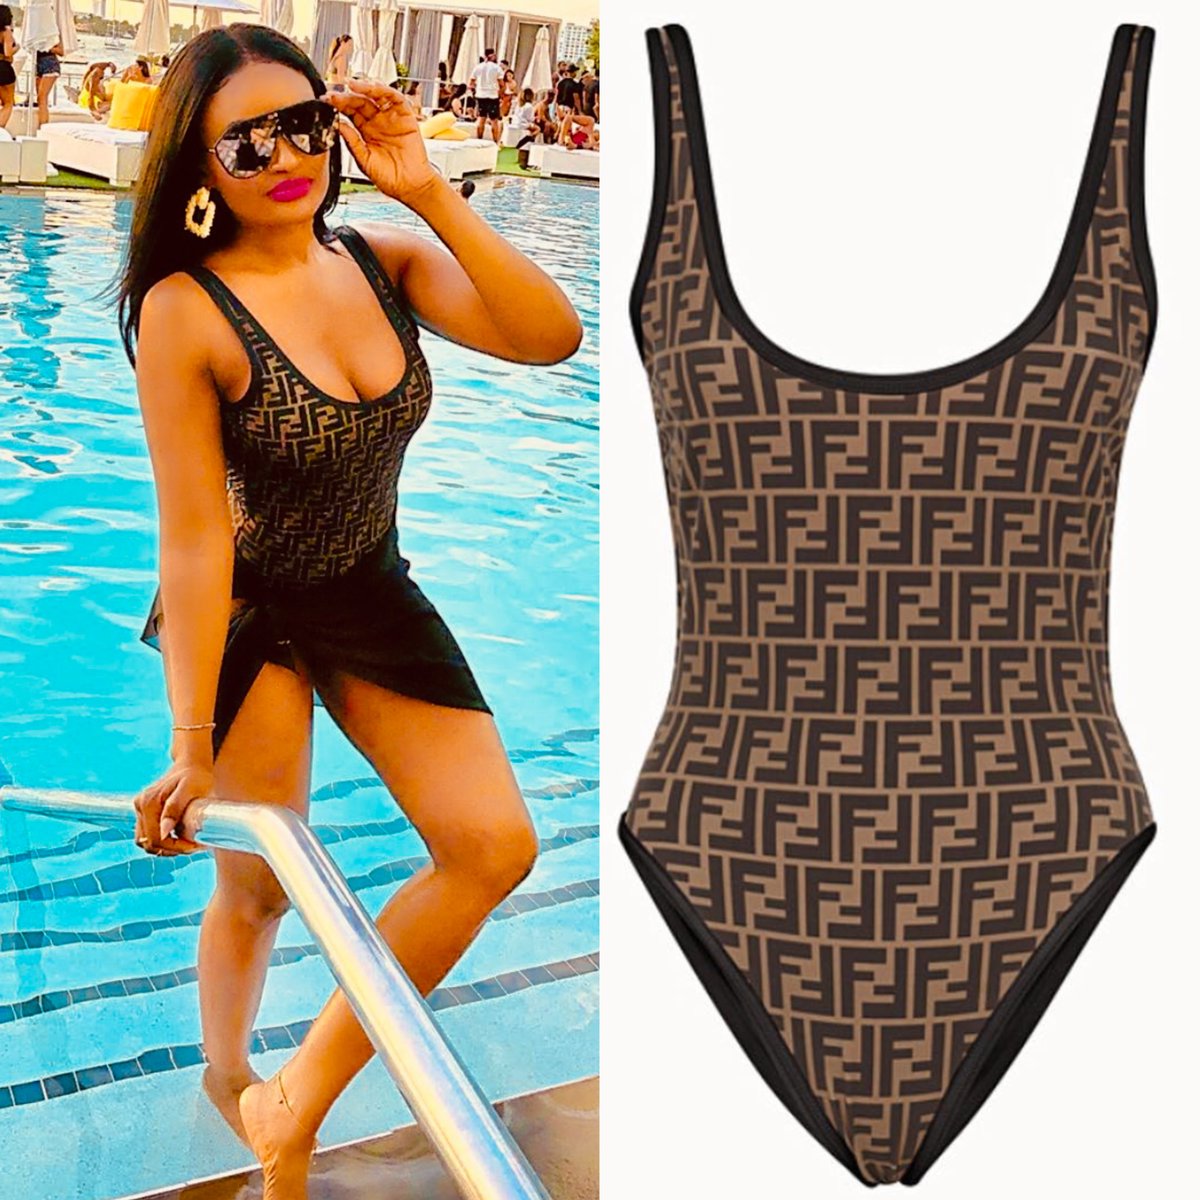 Image of Black and Brown Swimsuit 